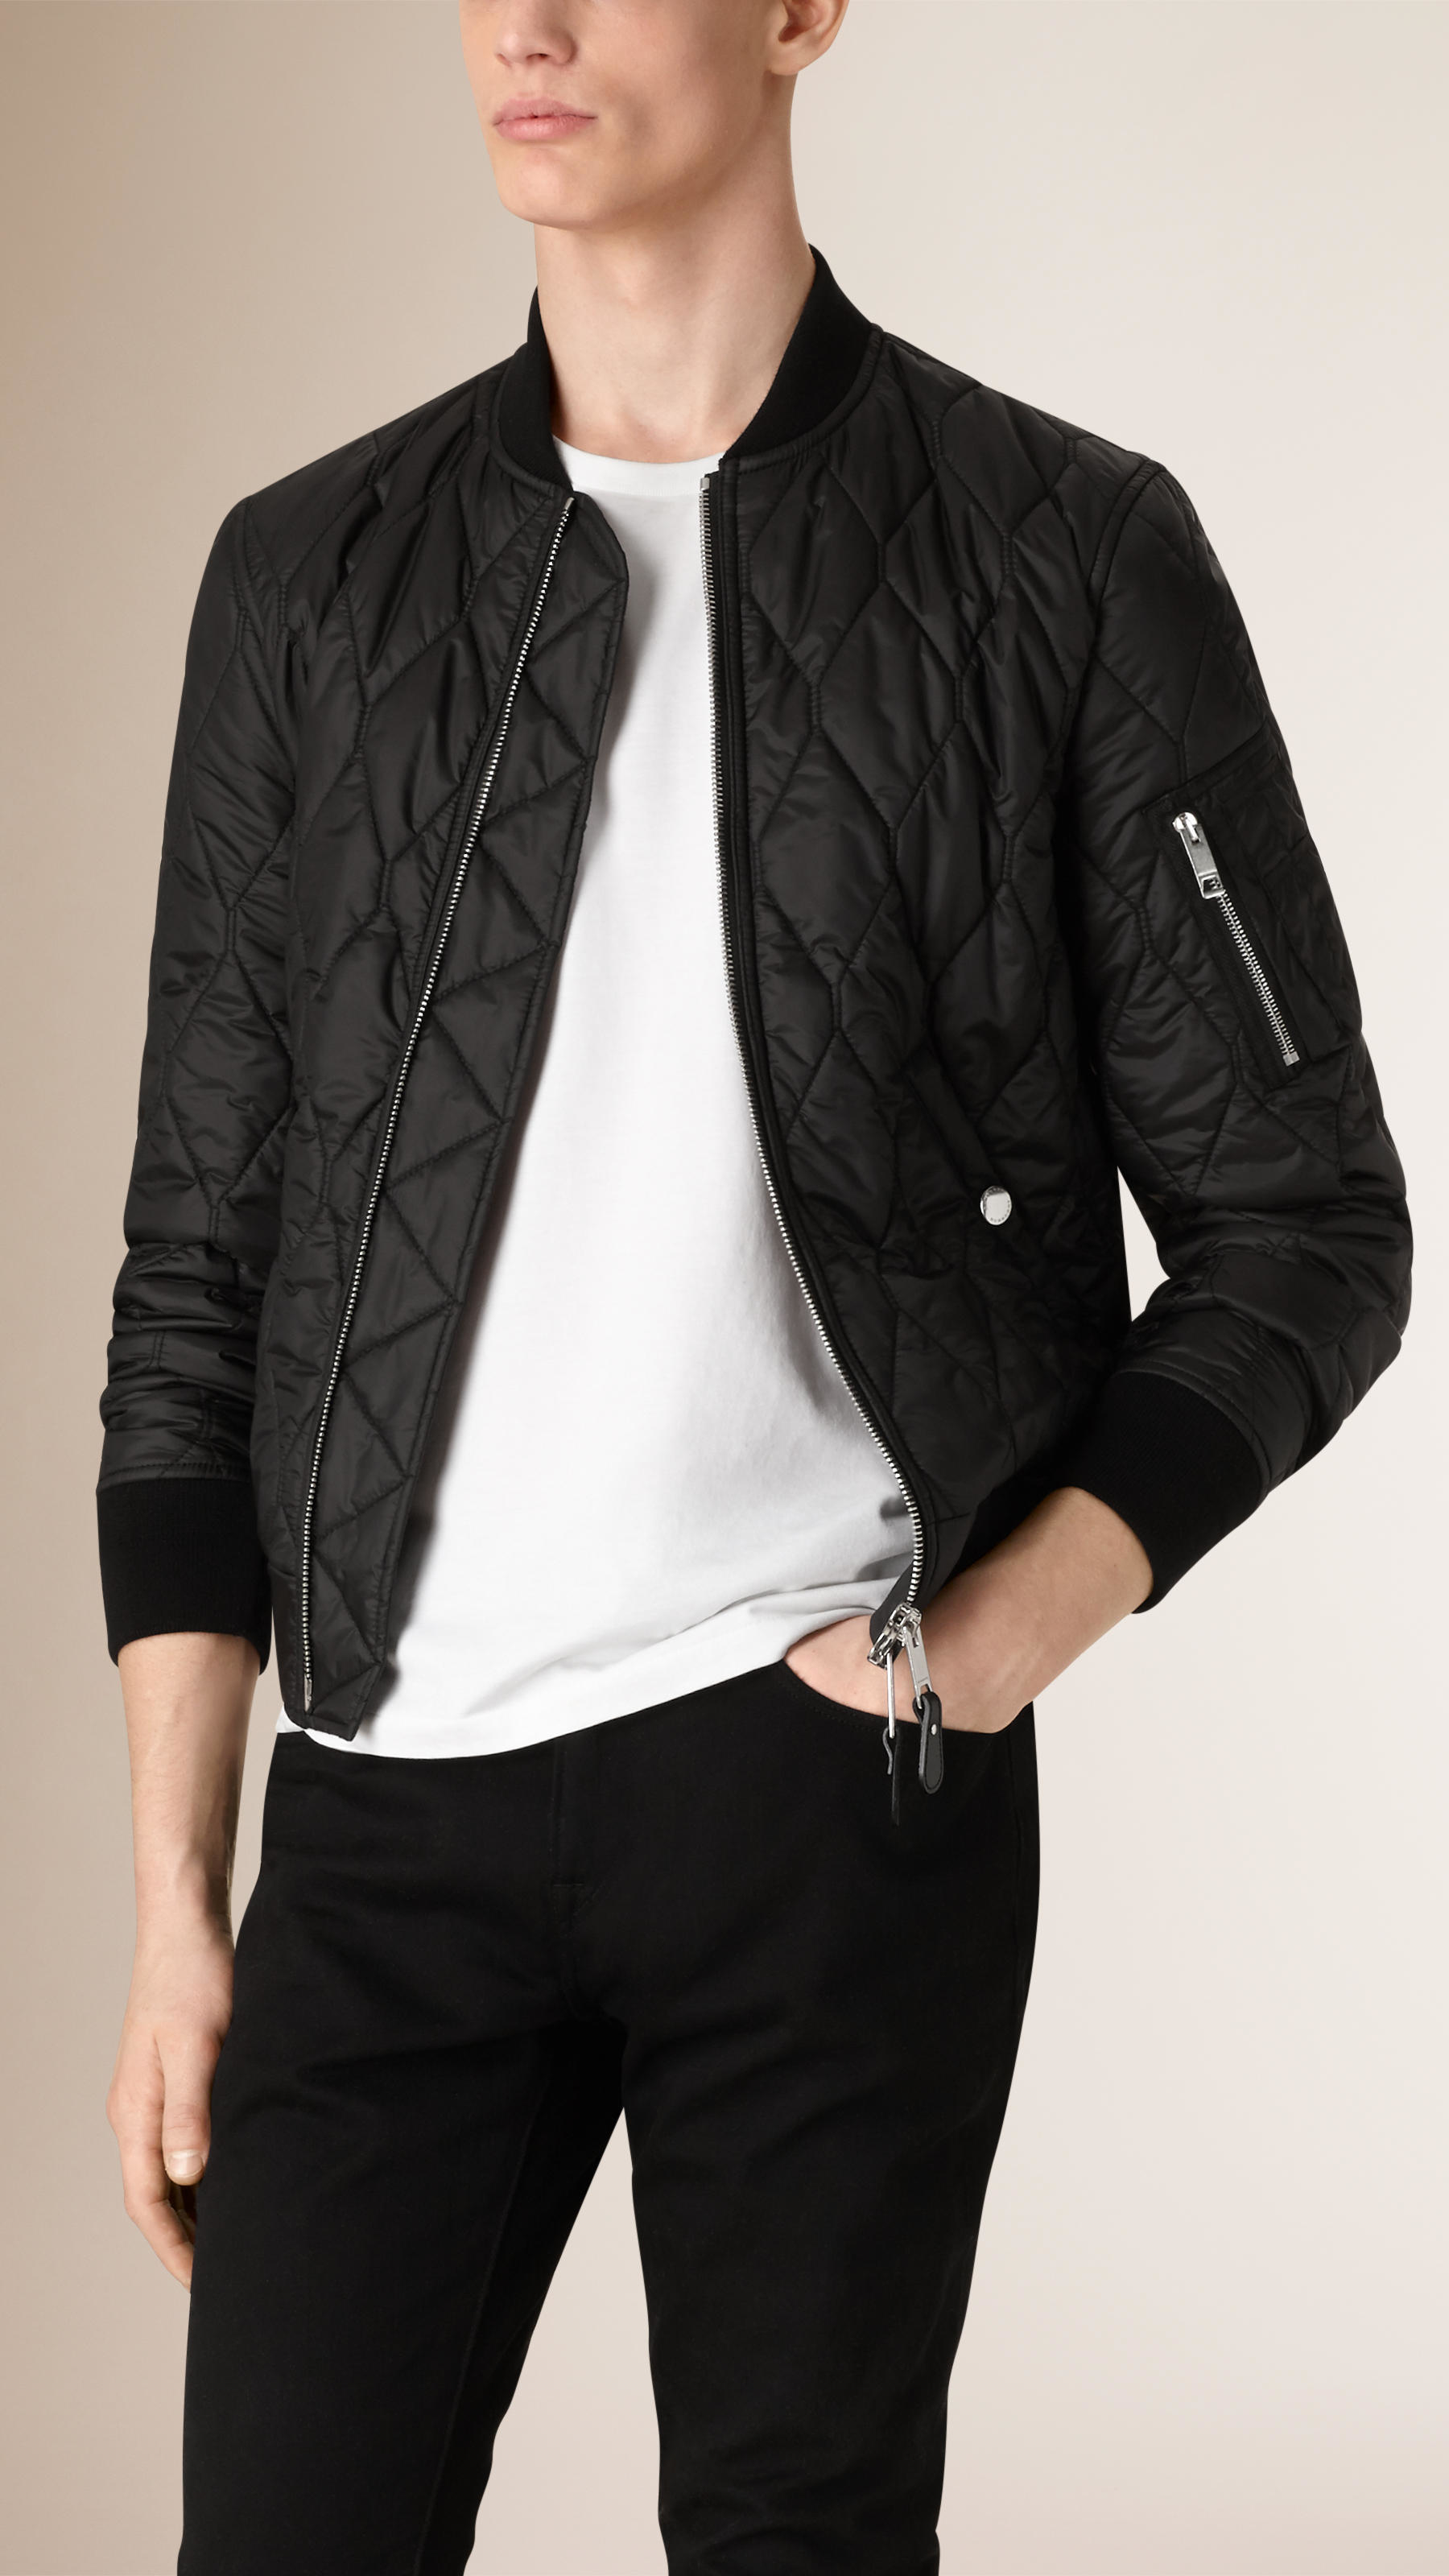 Sale > burberry men's quilted bomber jacket > in stock